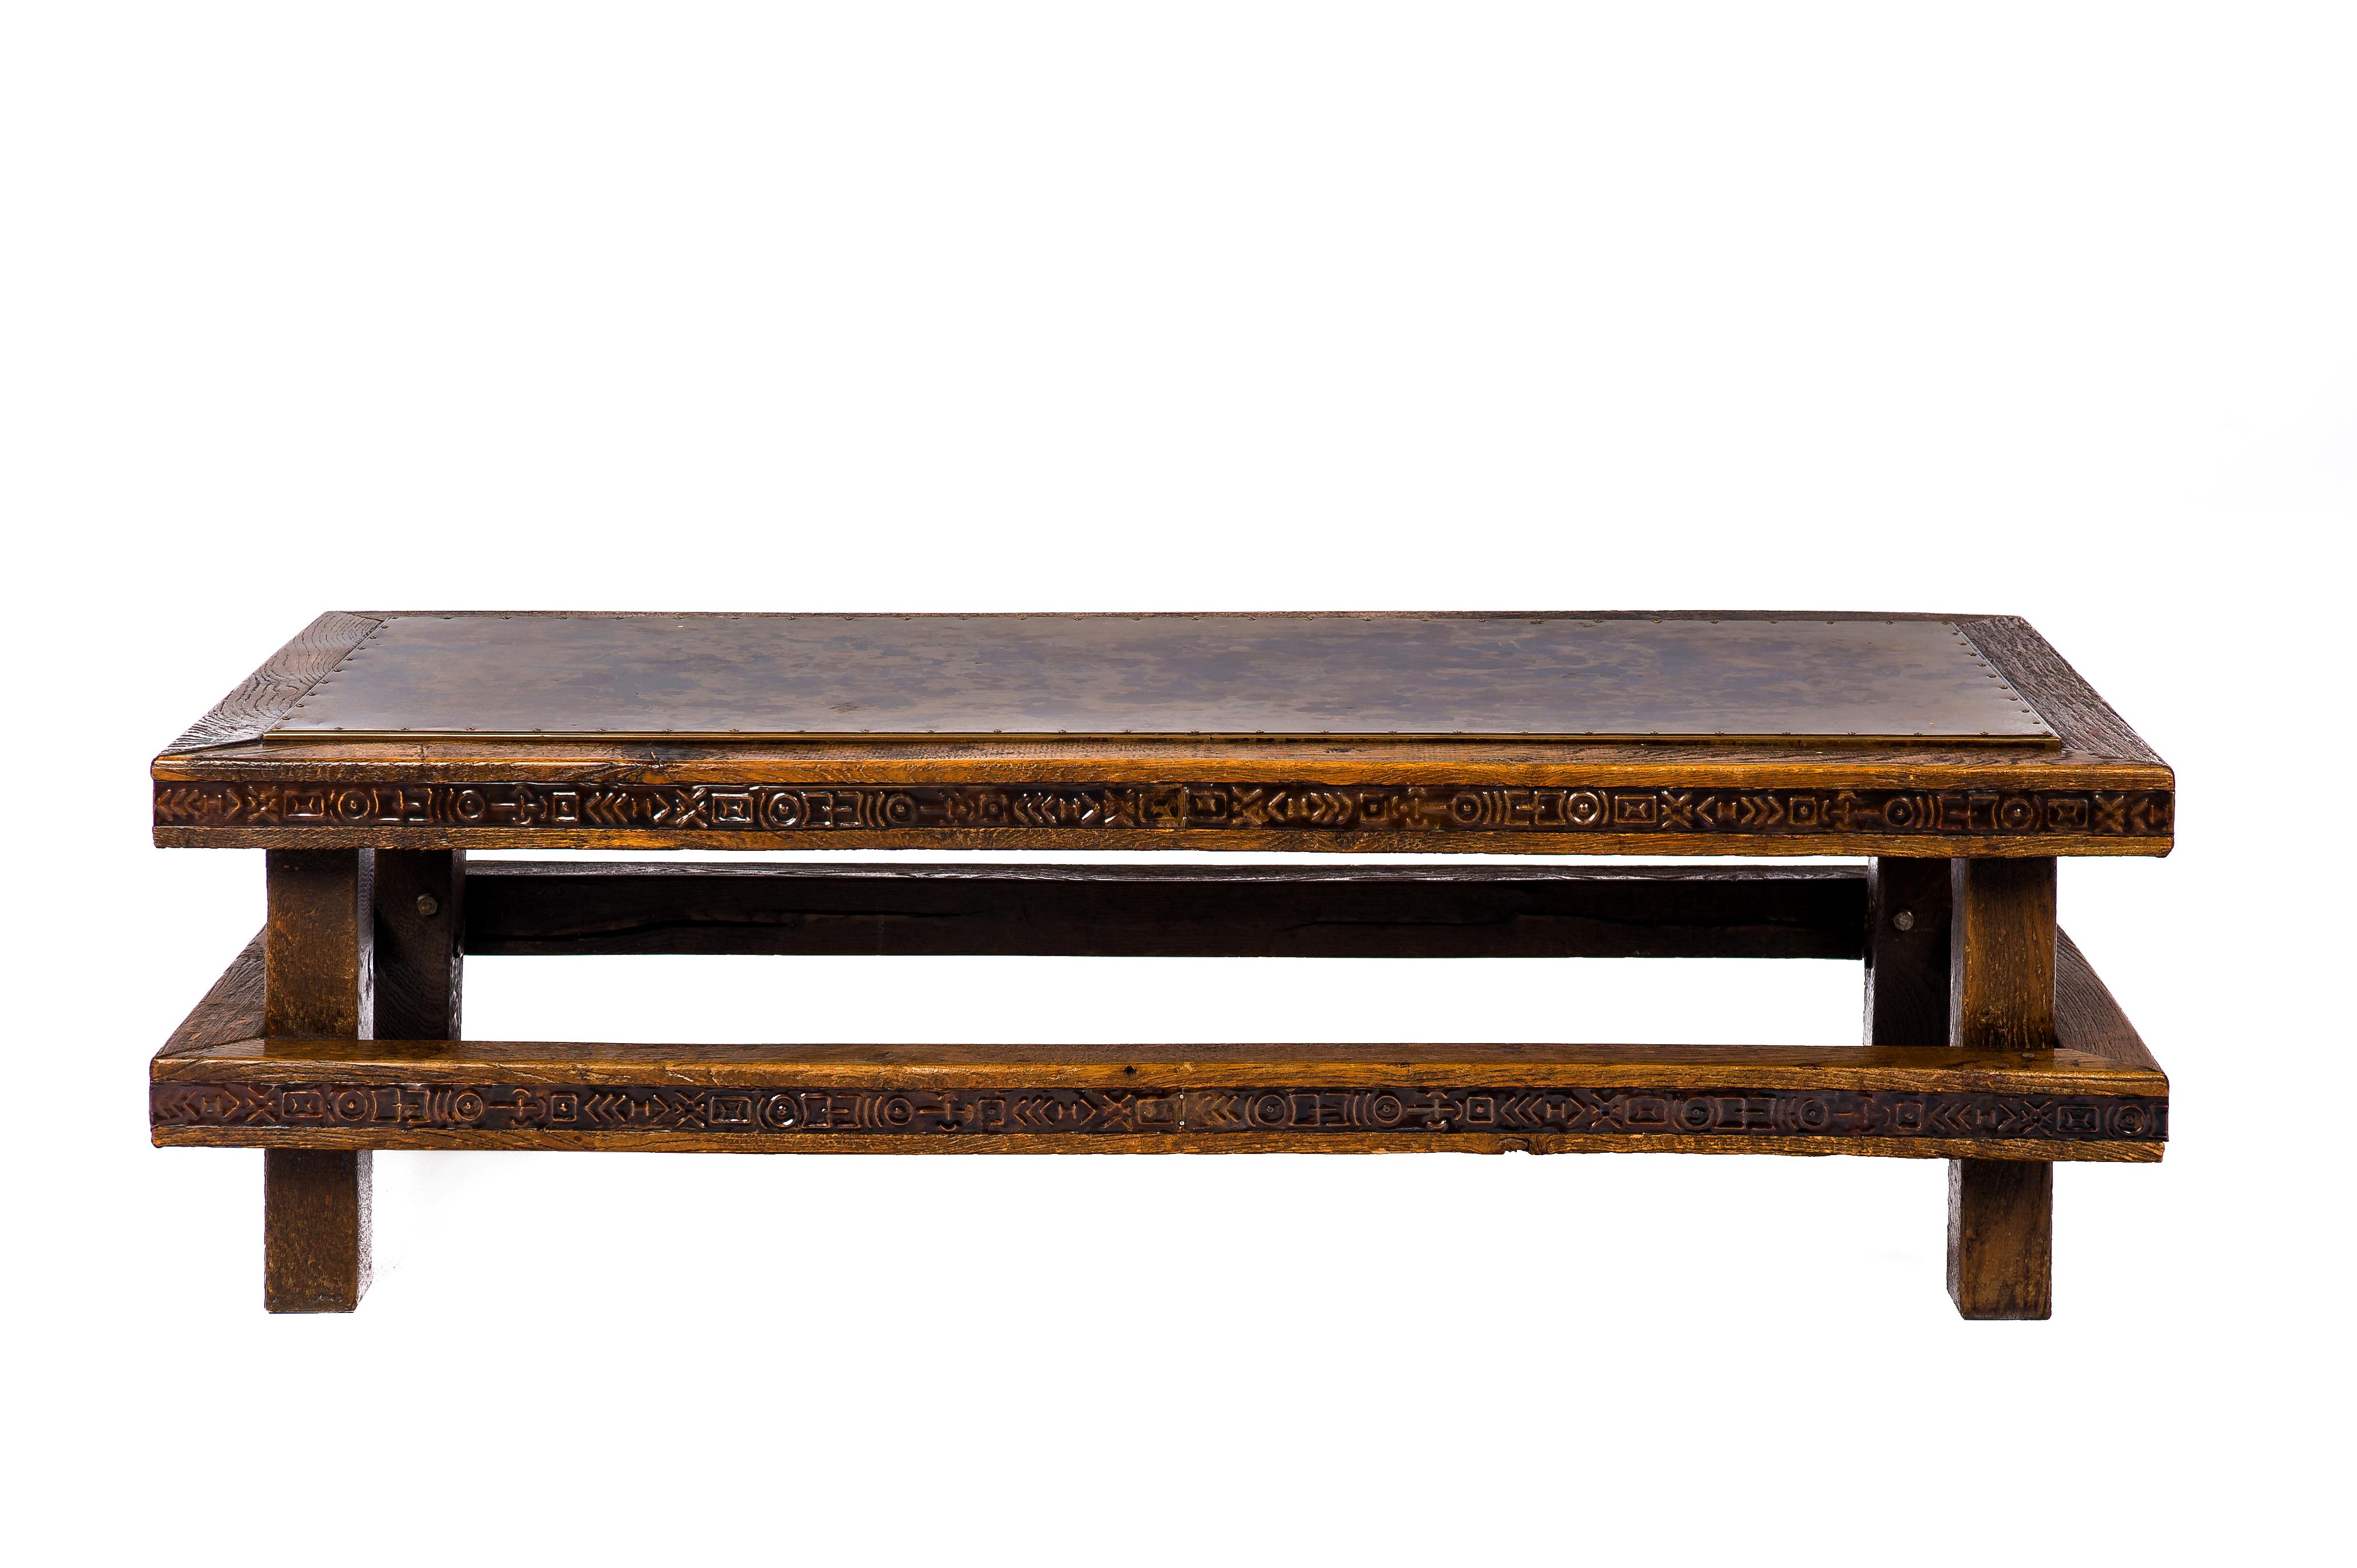 This beautiful midcentury Brutalist coffee table was made in the Netherlands circa 1960. The table has a relatively simple frame of solid square oak beams that are 2,8 x 2,8 inches. The beams were joined by lag bolts and are decorated with copper